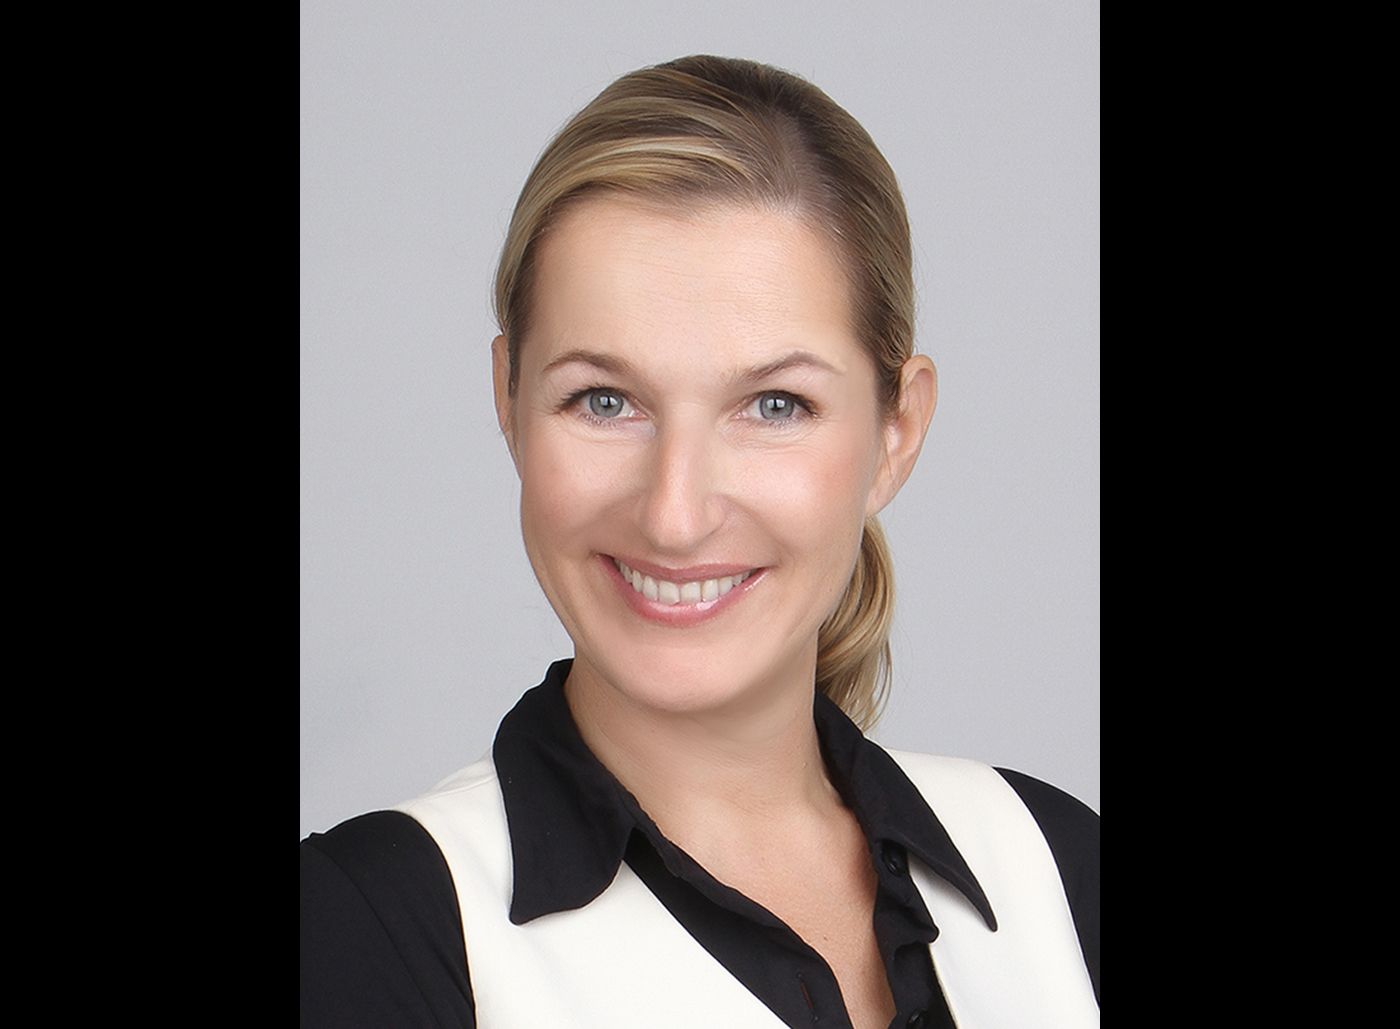 Britta Pfister, managing director, head of wealth planning, Asia-Pacific